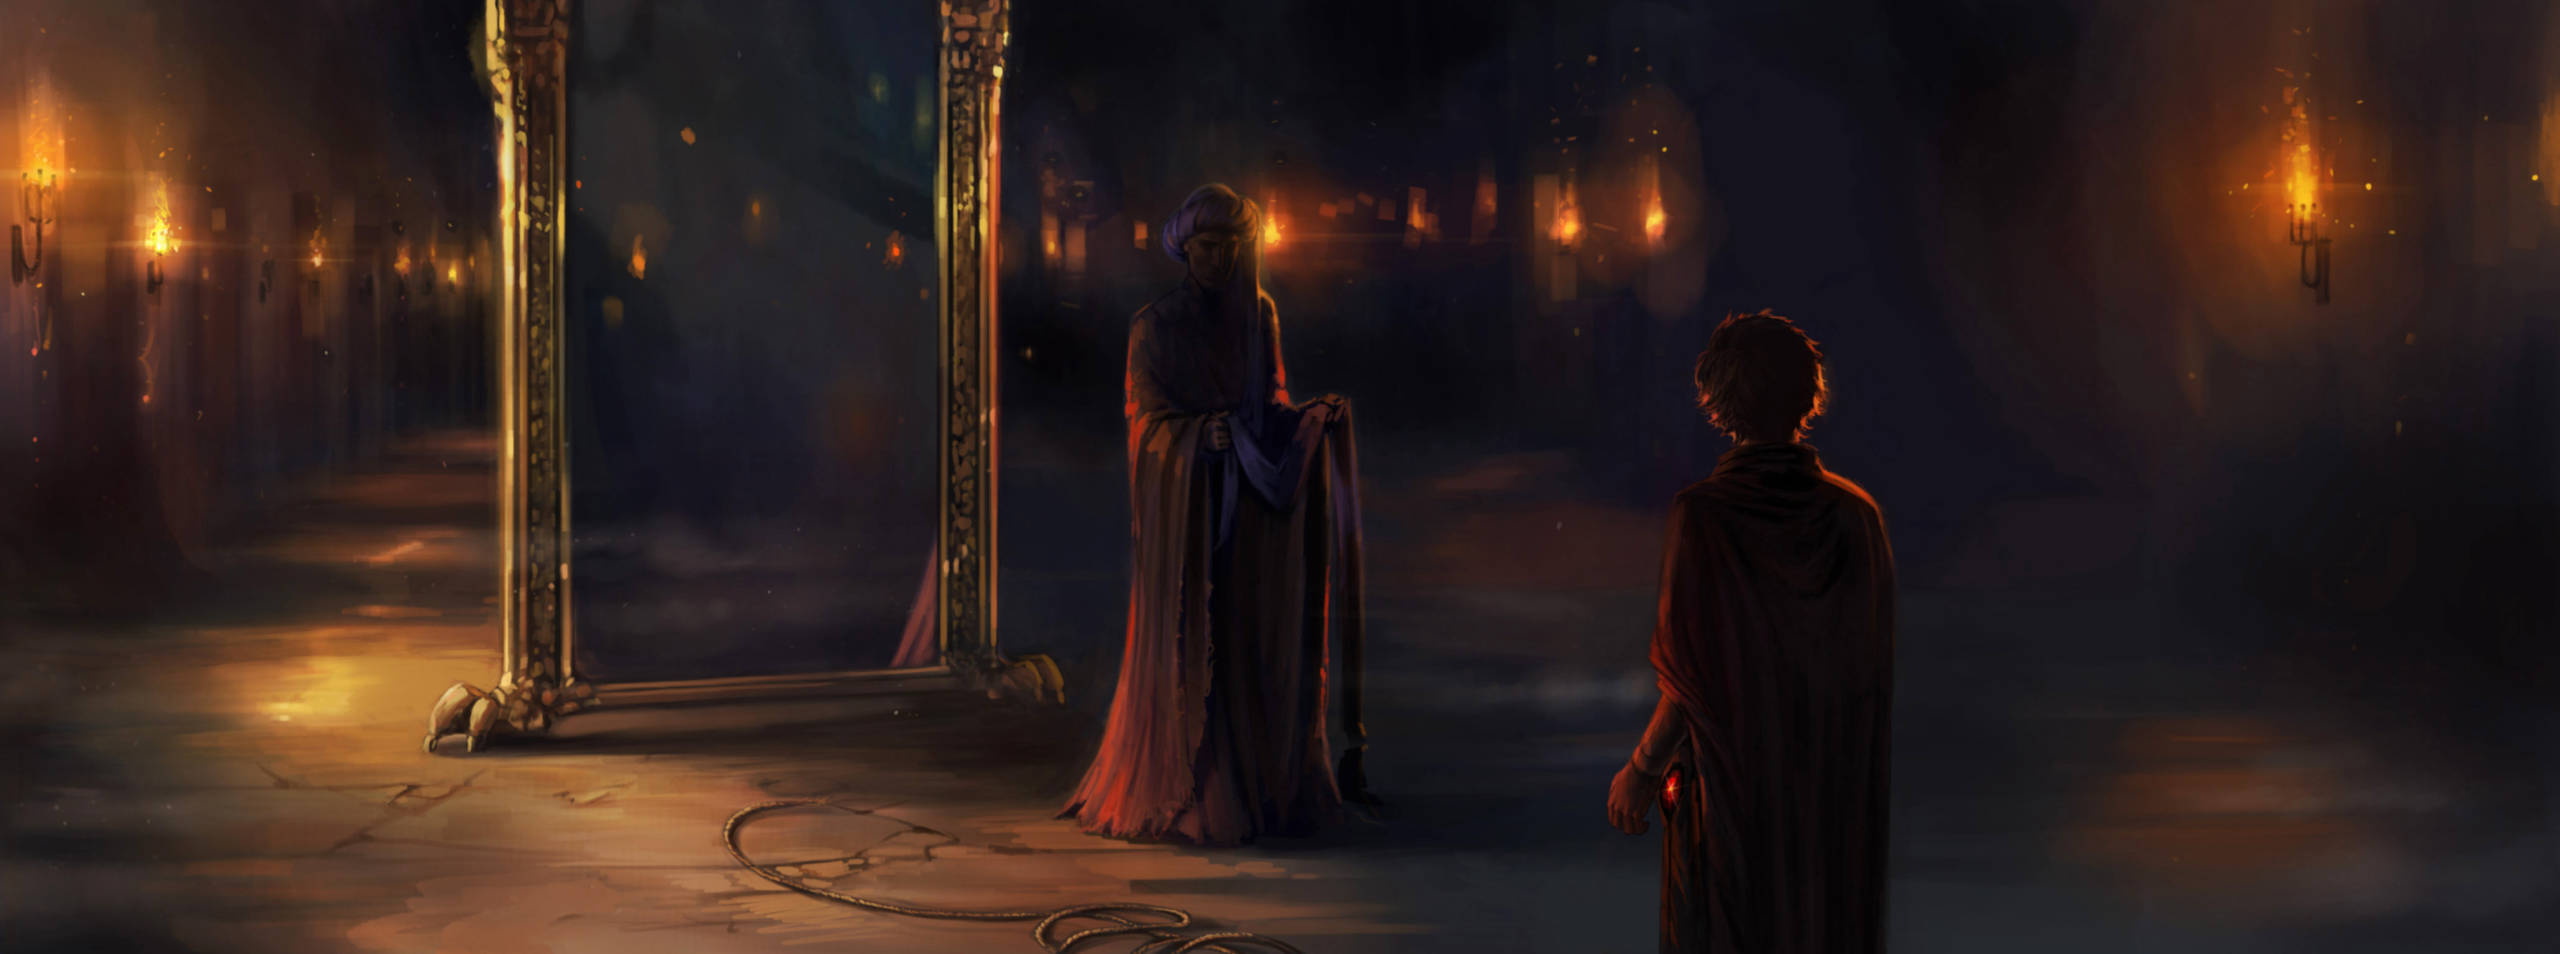 Quirrell and Harry in front of the Mirror of Erised.